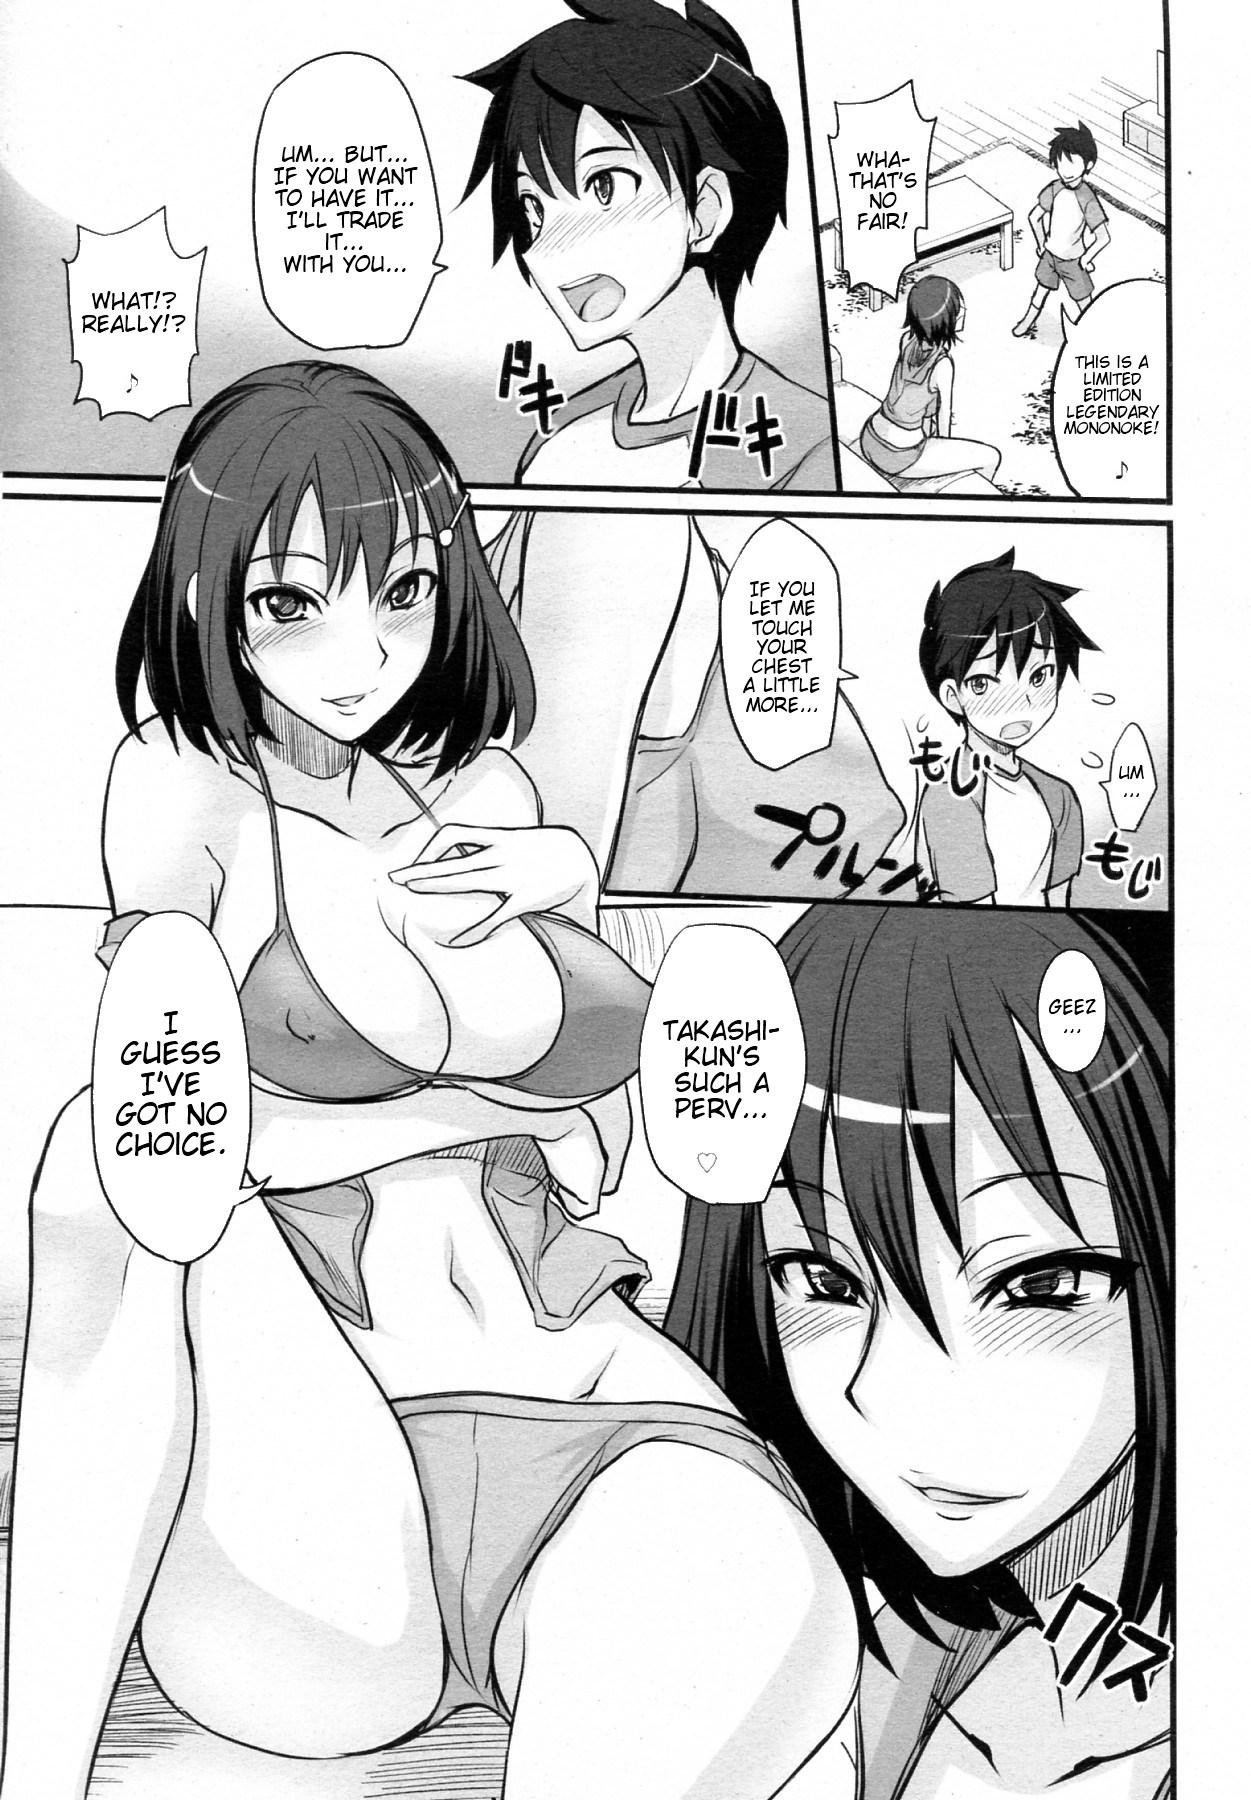 Anal Gape Game Shiyouze! | Let's Play a Game! Stripping - Page 7